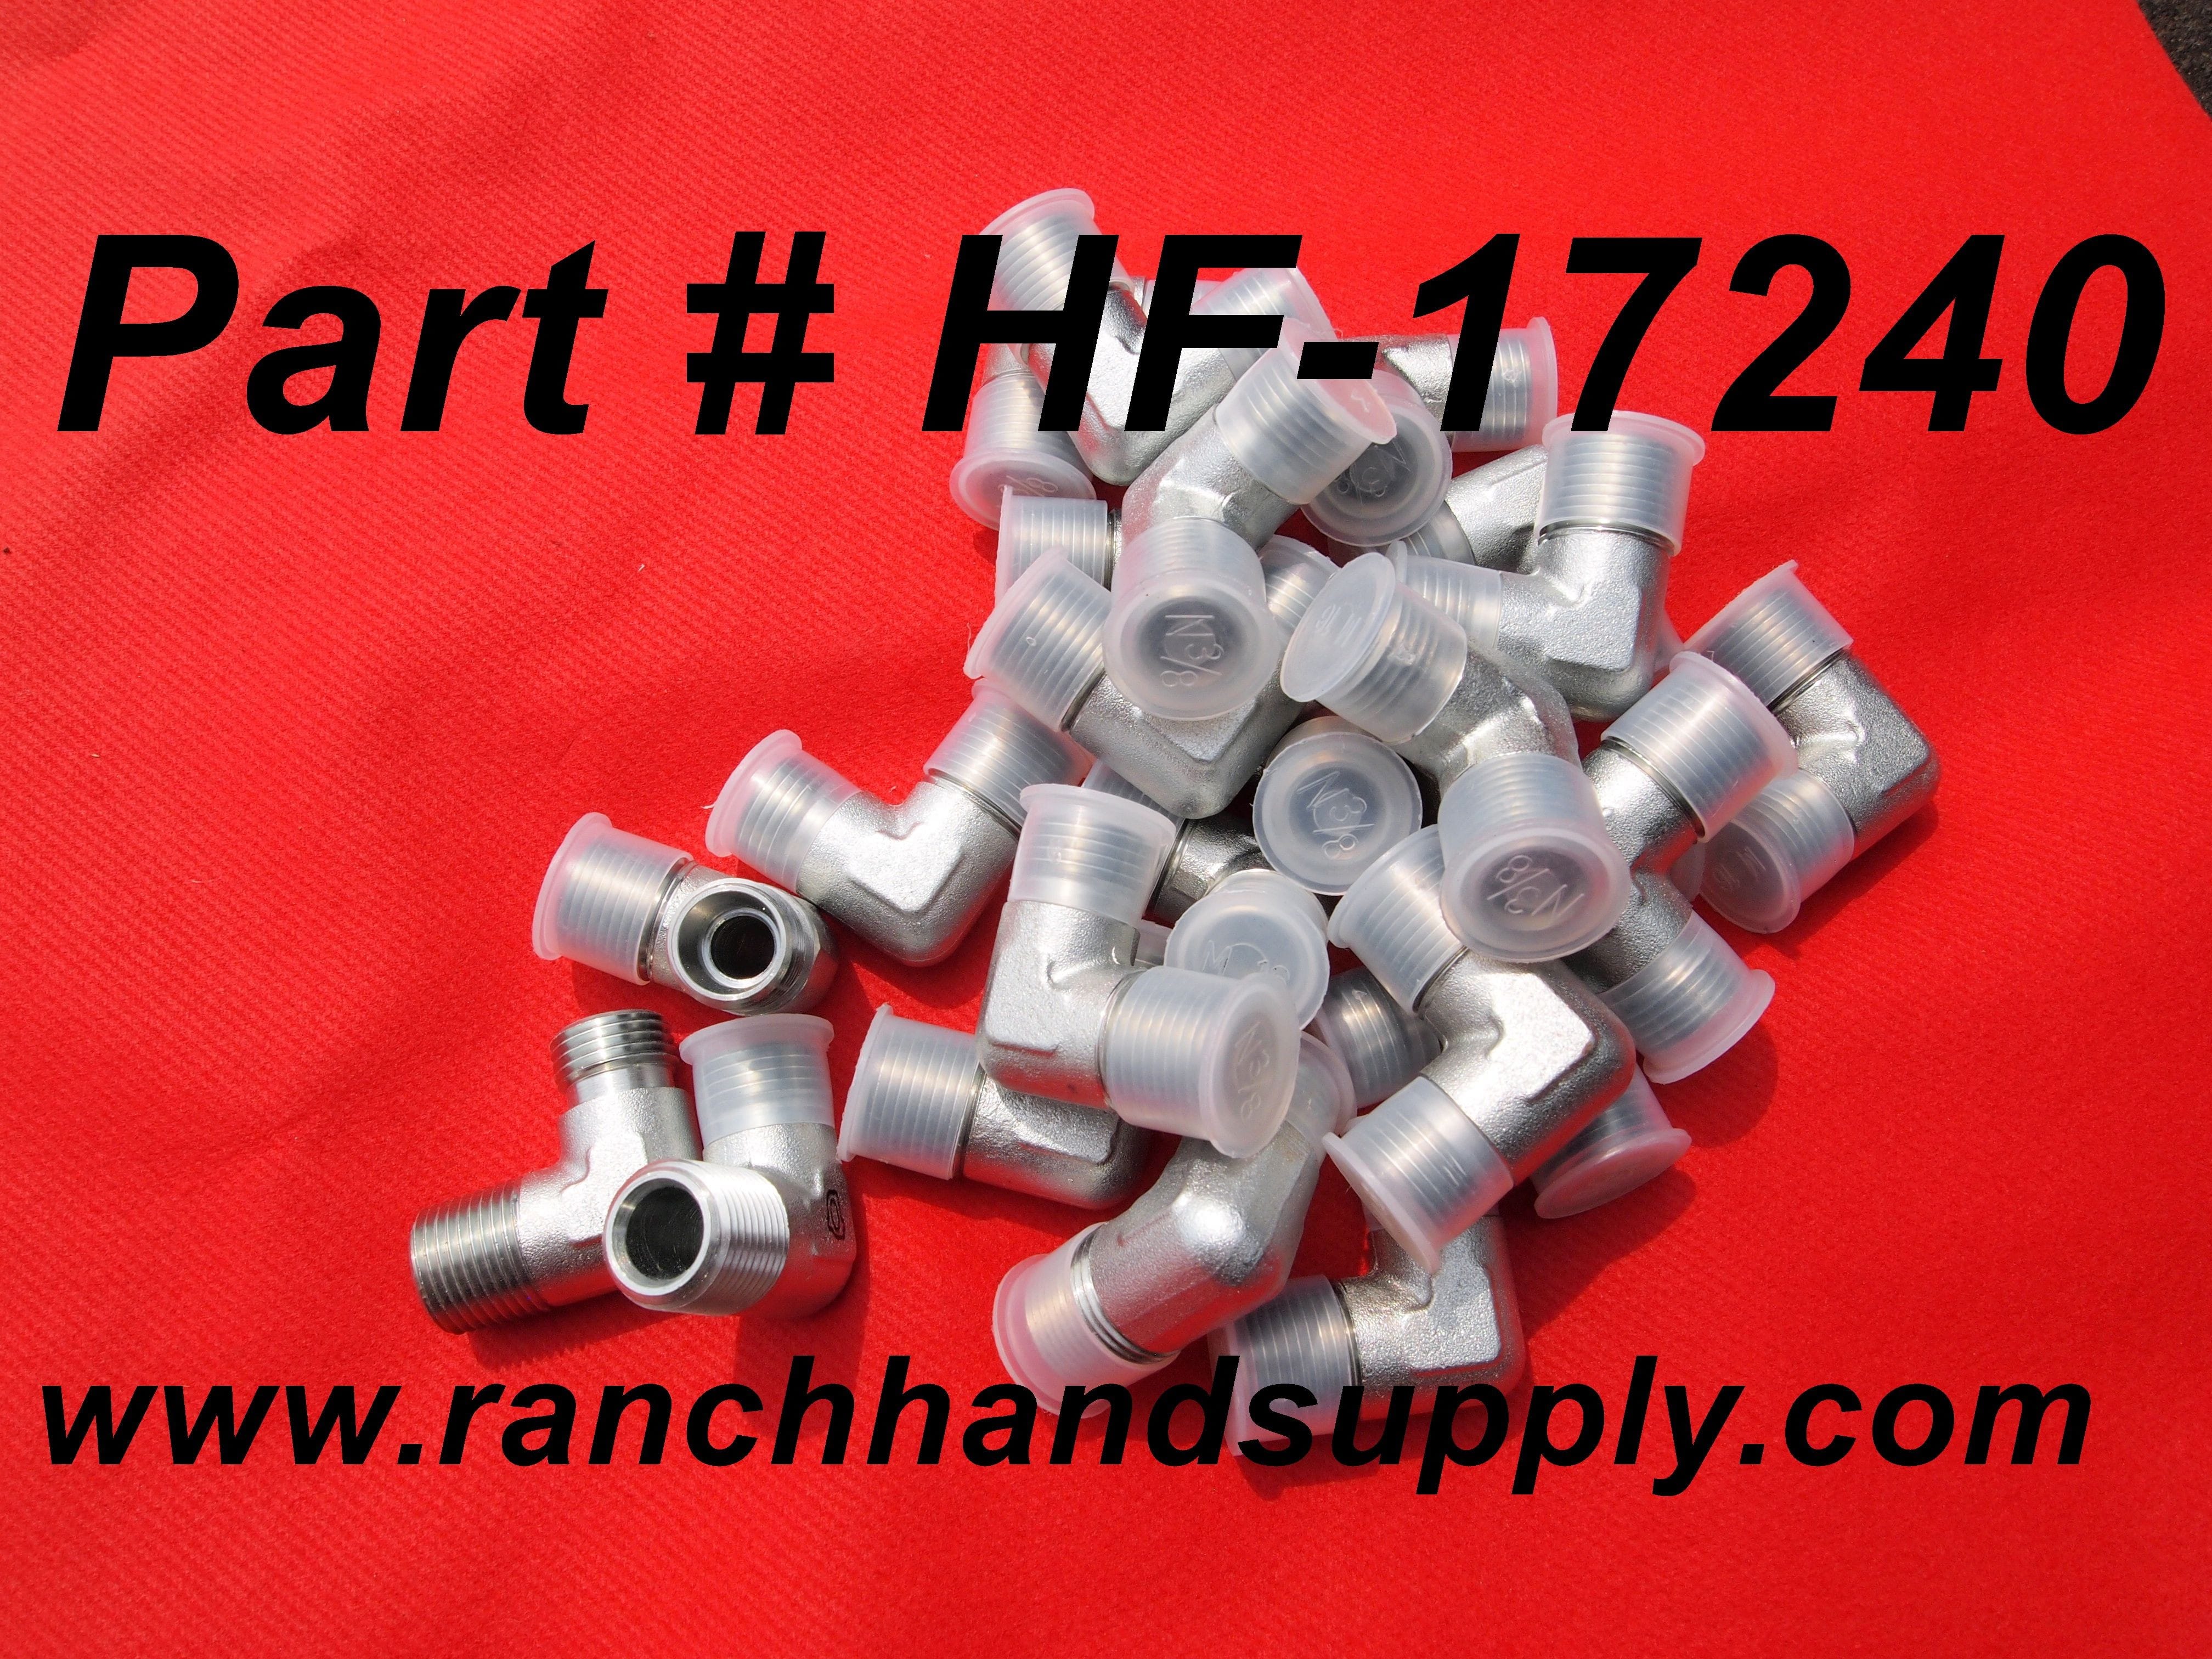 Elbow for Harbor Freight towable backhoe hydraulic cylinders.